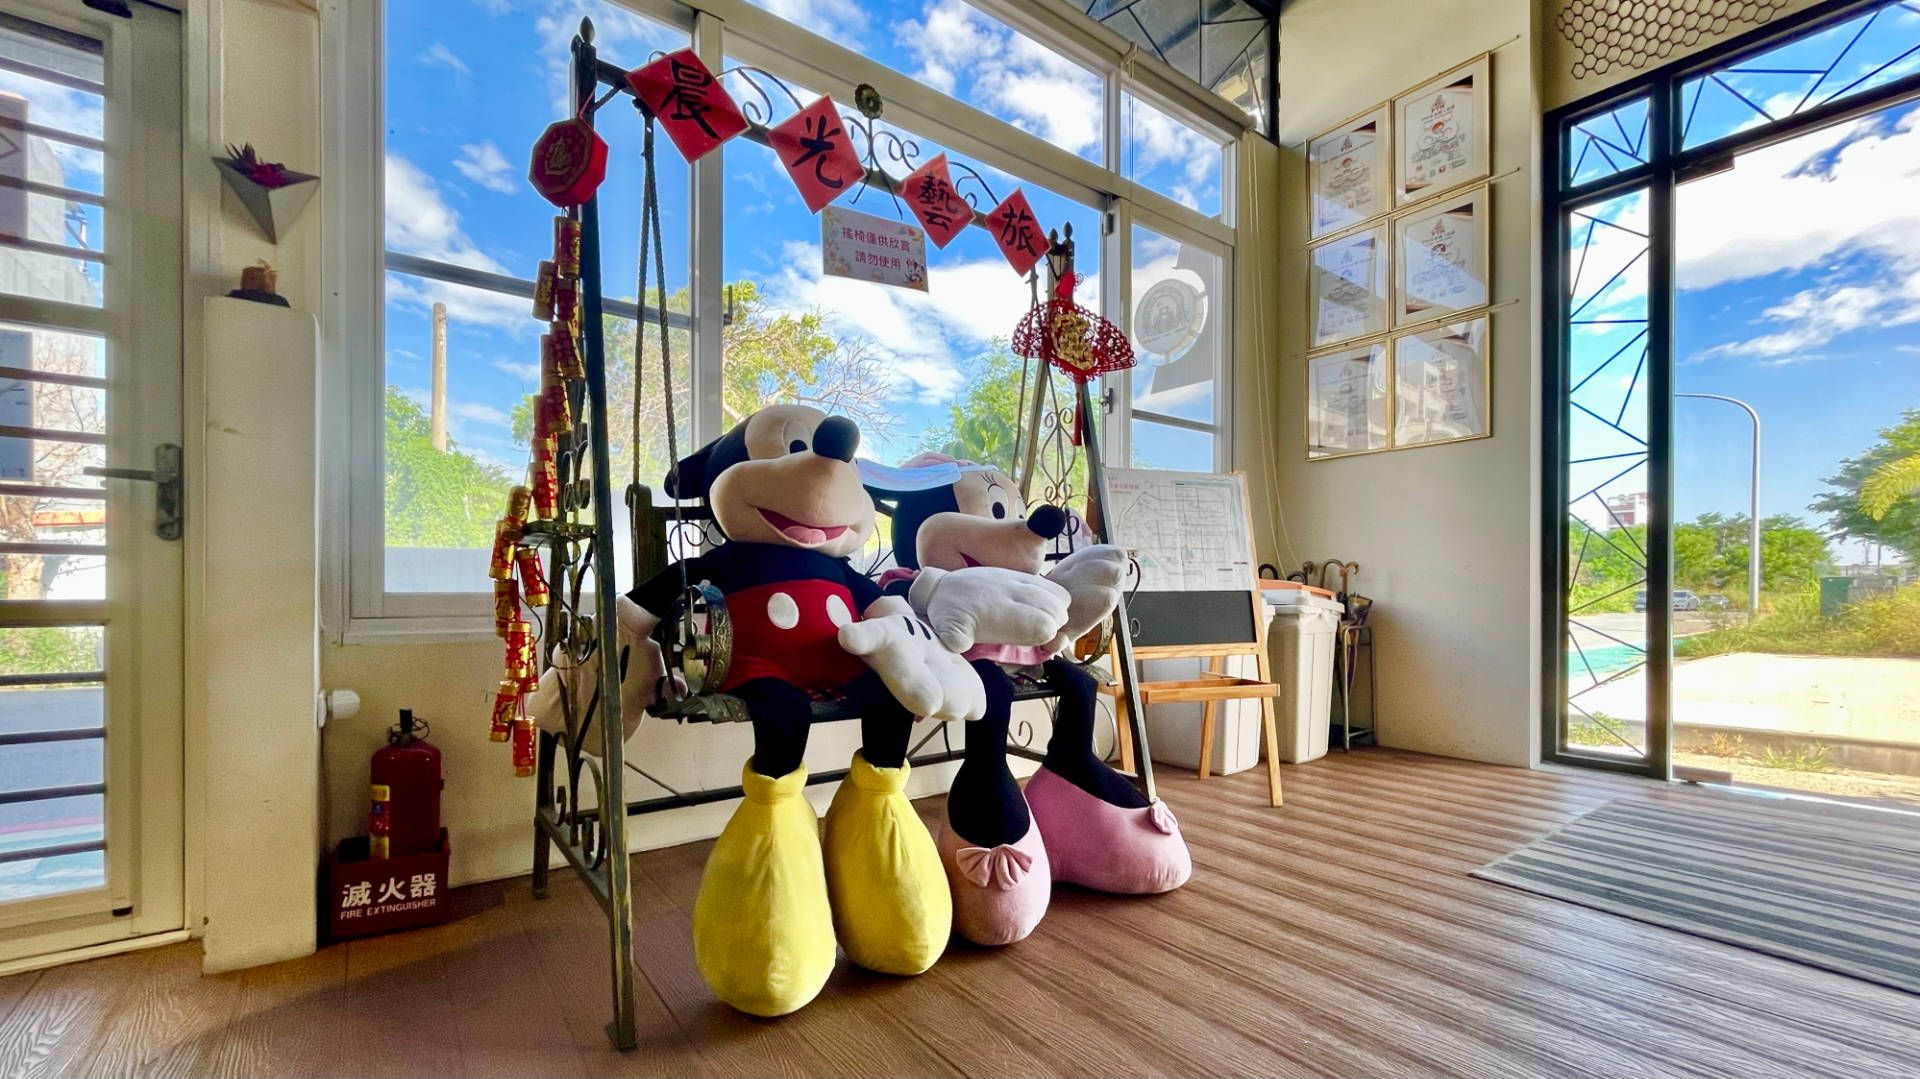 Large Mickey Mouse and Minnie Mouse soft toys placed on a swinging porch chair, in the lobby of a hotel.